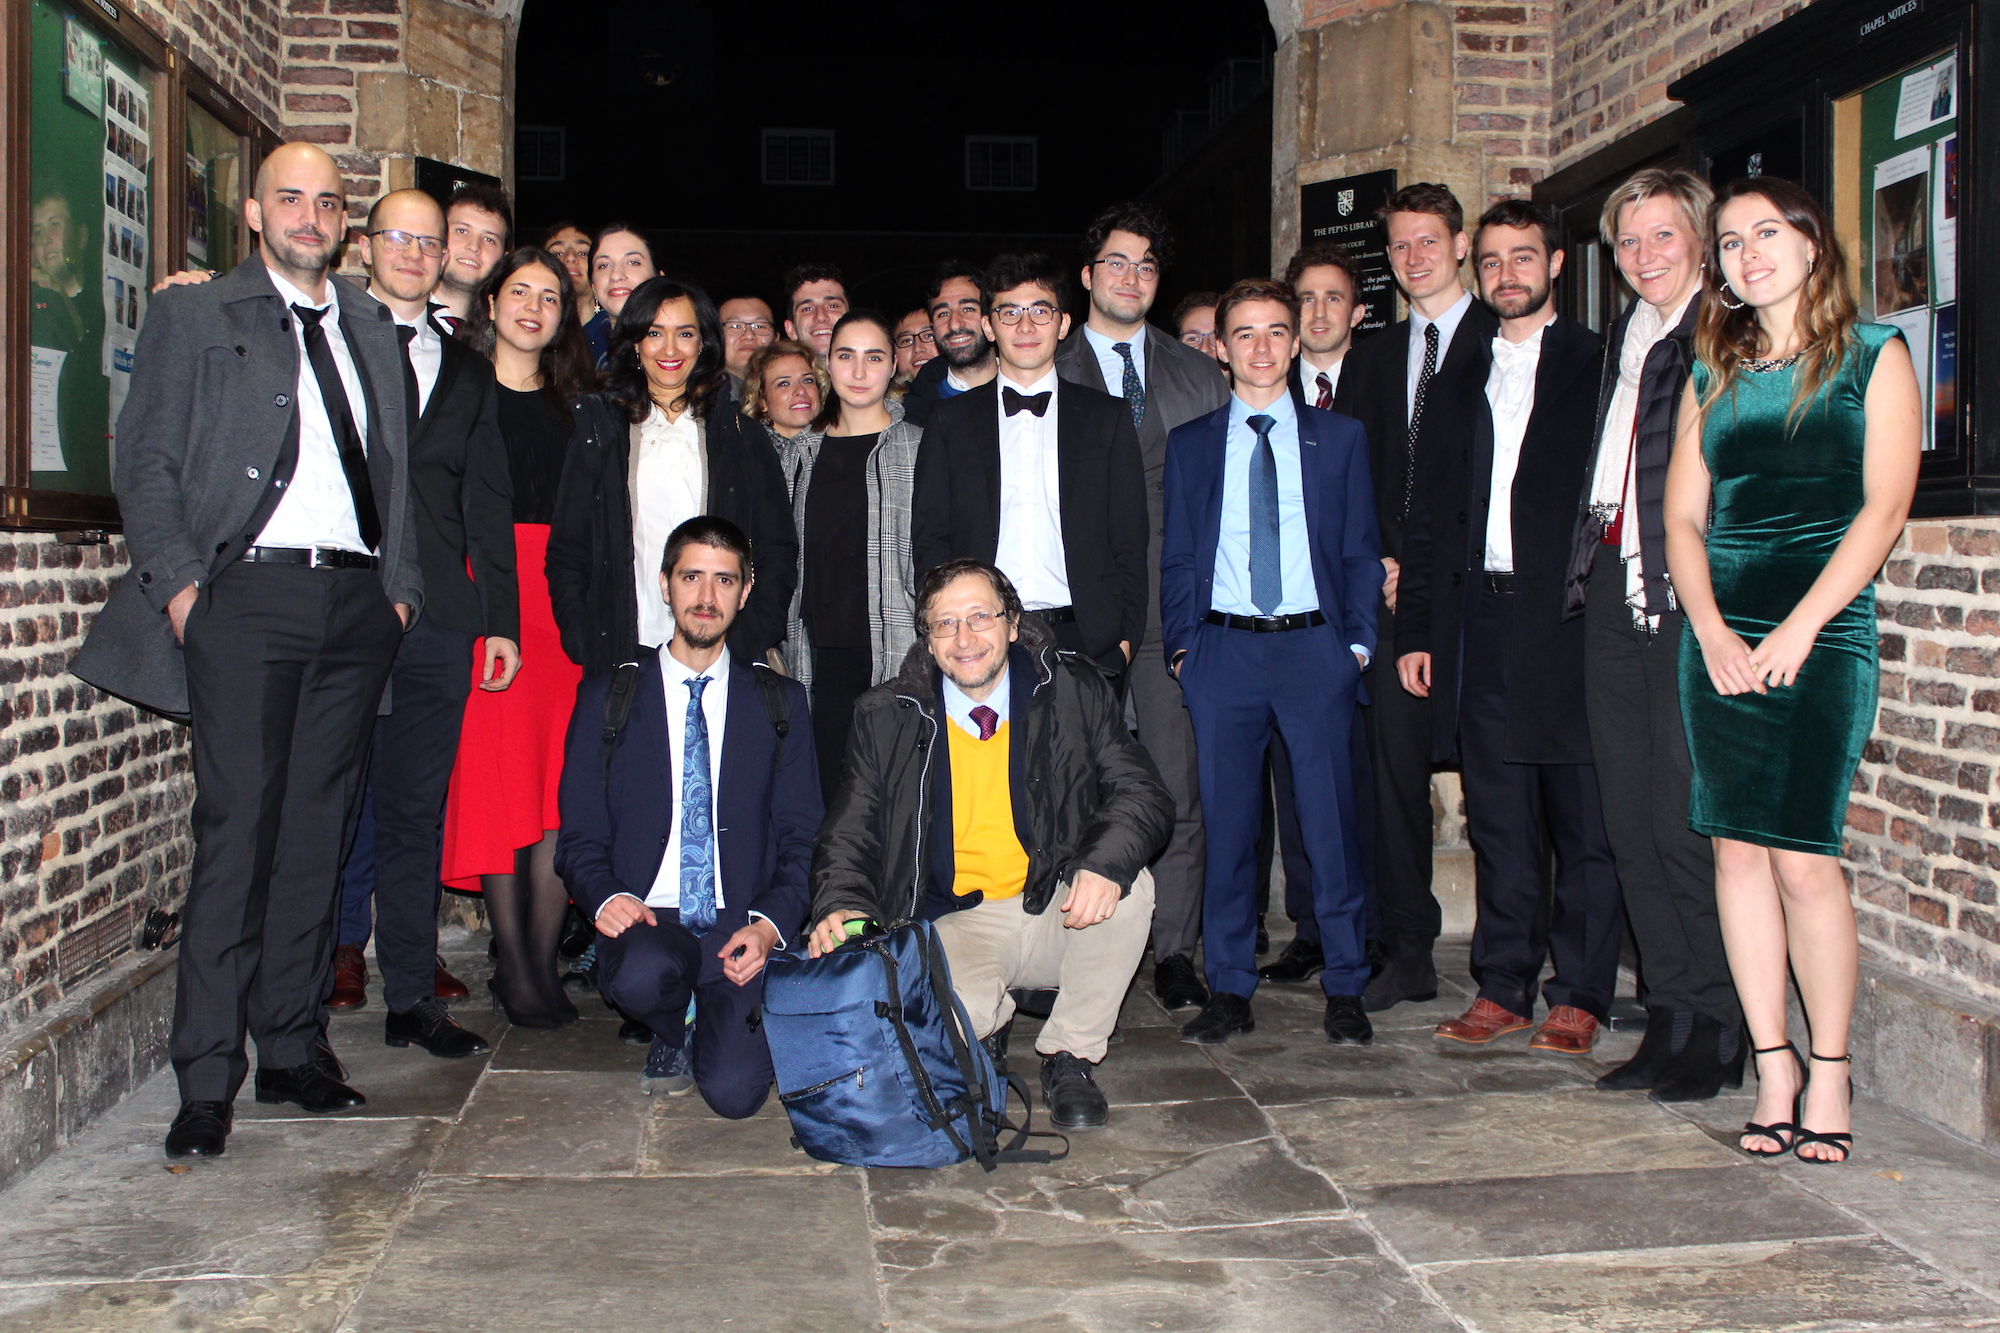 Members of the AI research group after formal dinner at Magdelene College, Cambridge.